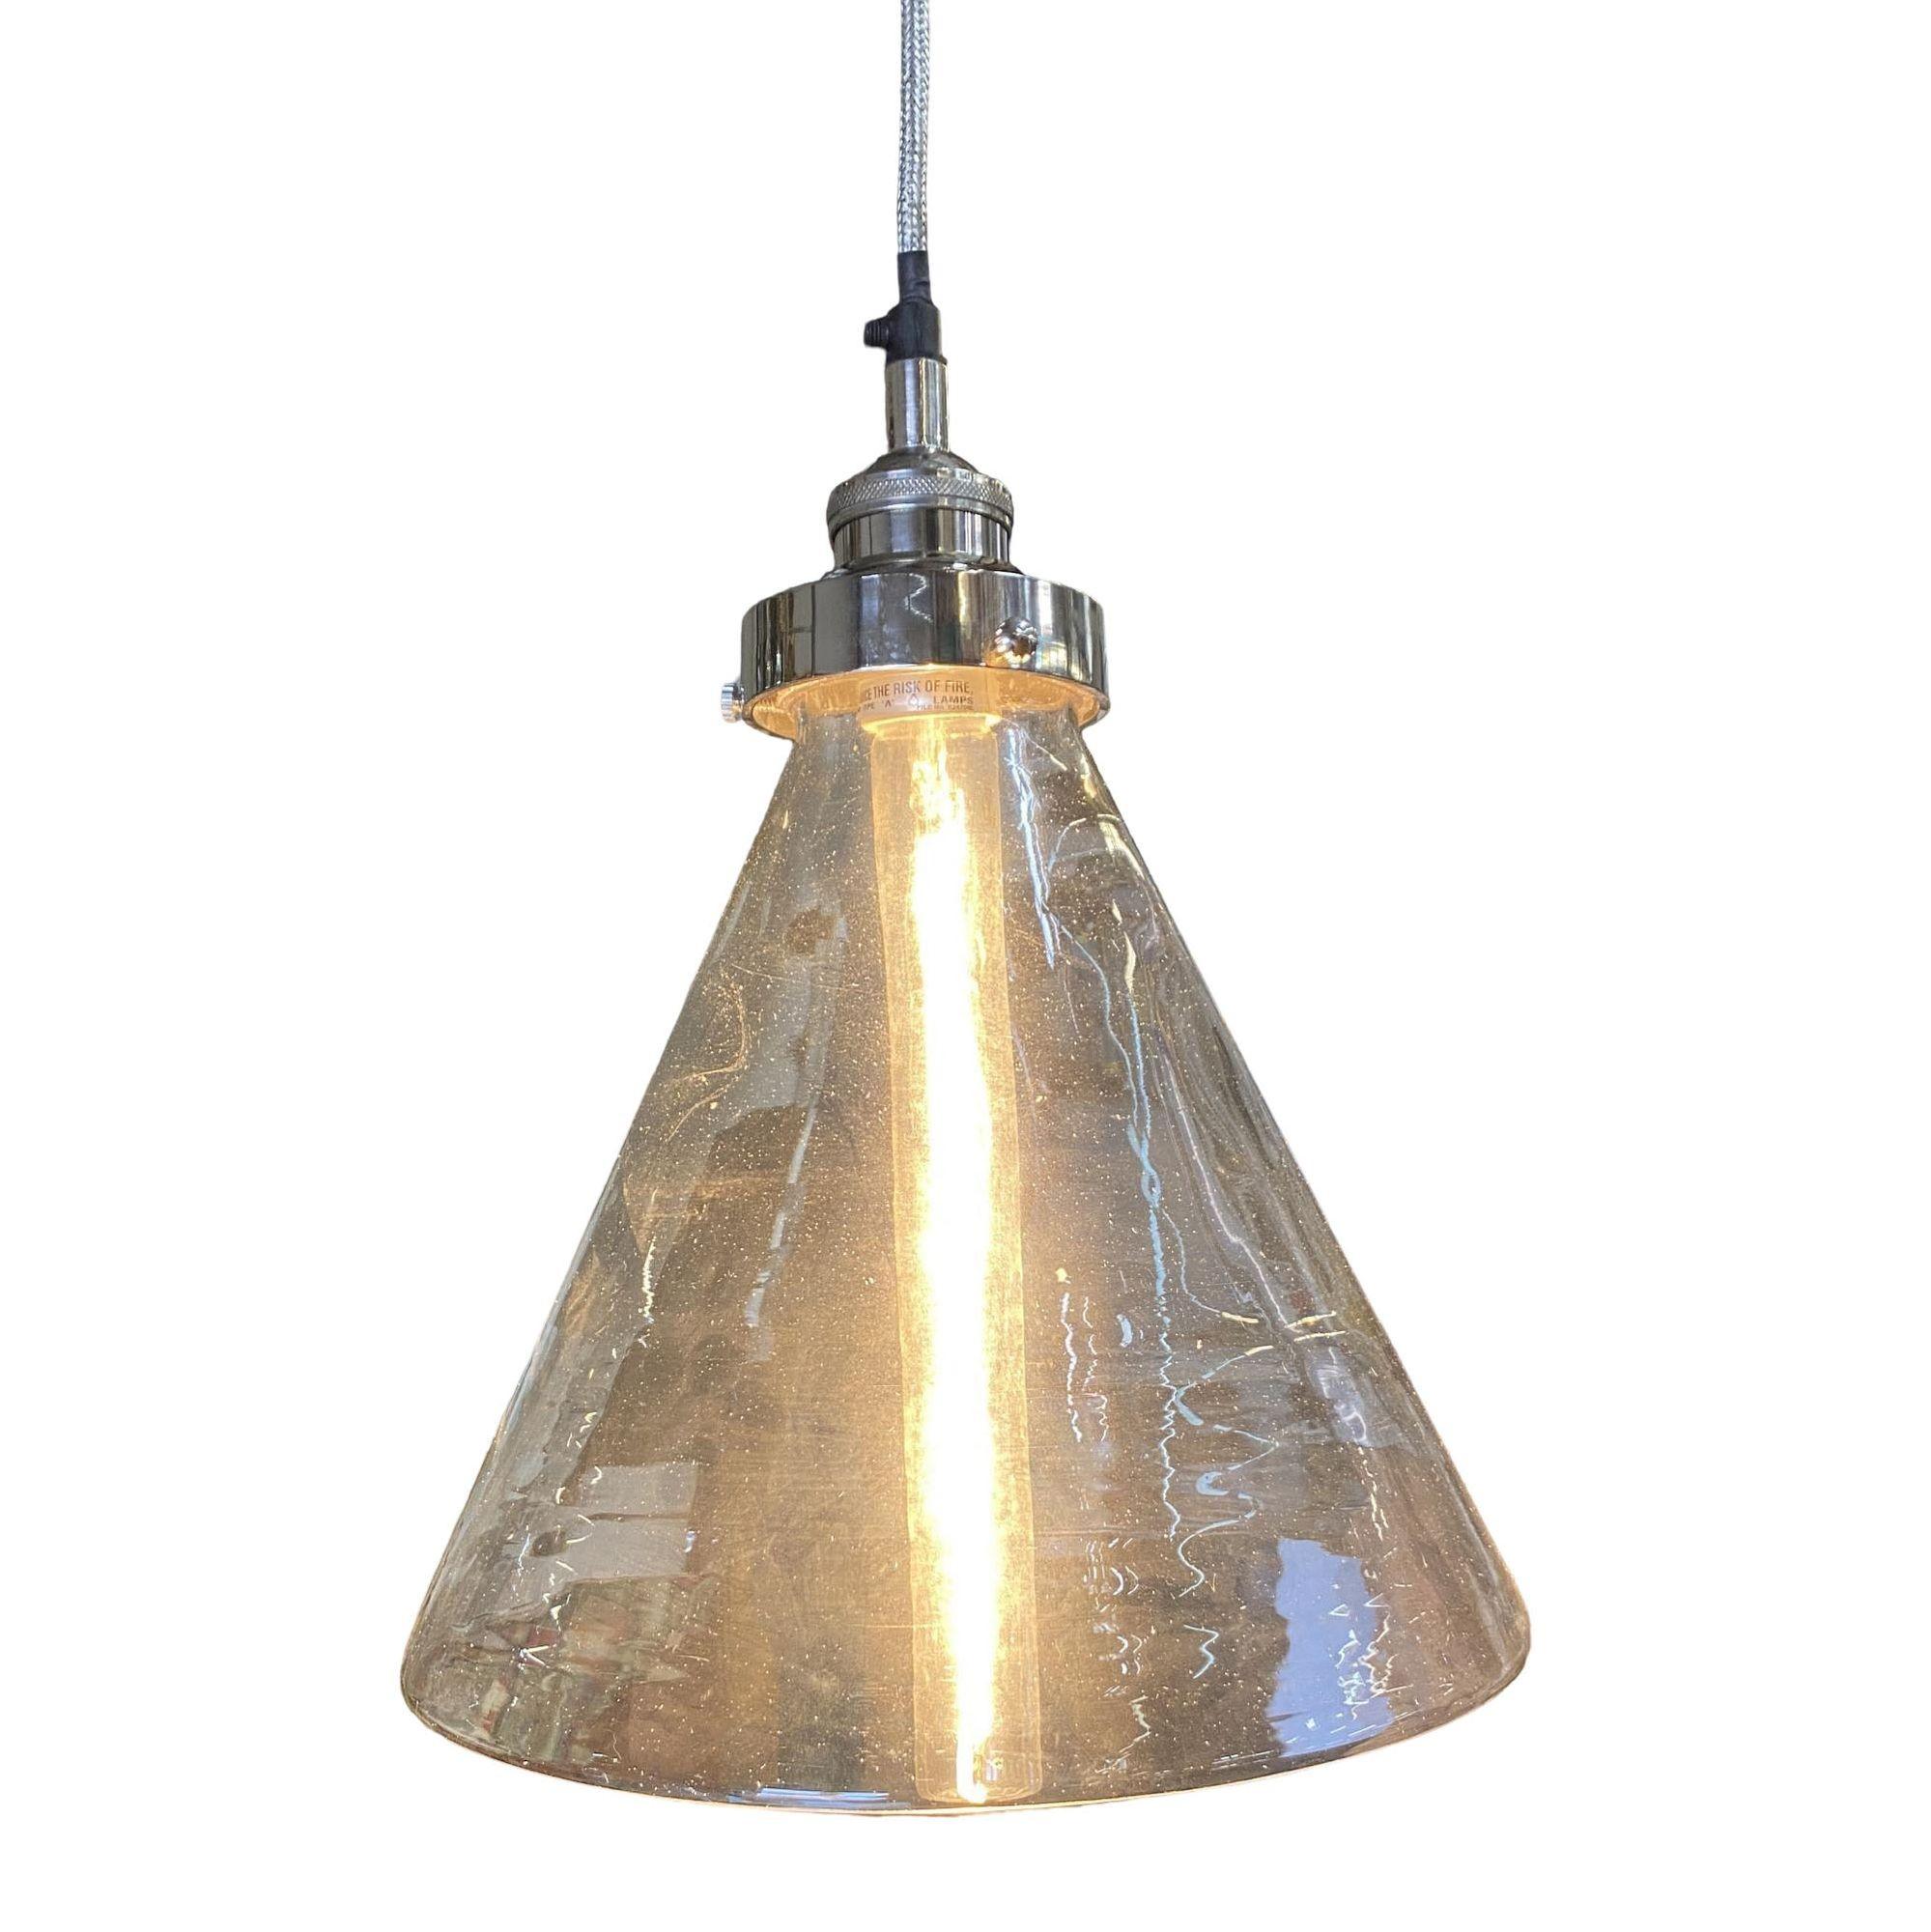 Modern industrial lamp silver brushed ceiling pendant with clear glass cone shade.

Shade : 7.2